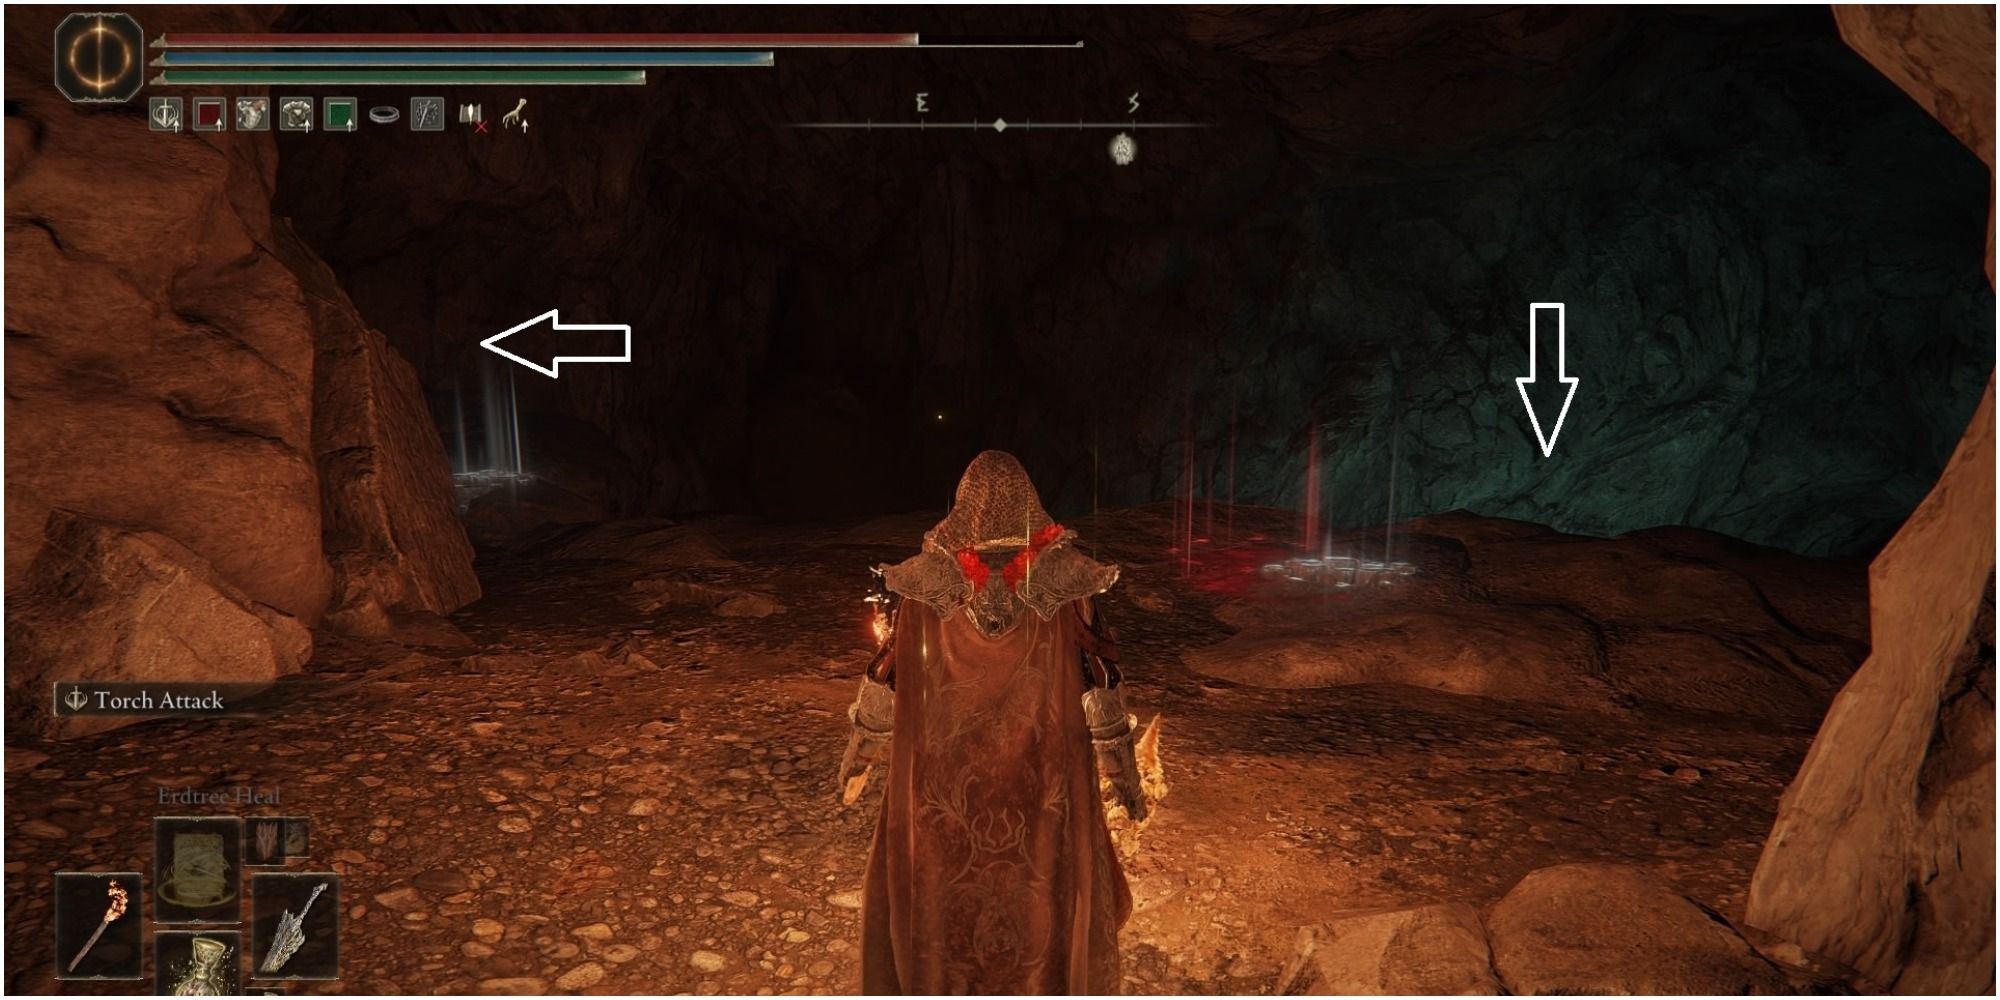 The player reaching a cavern with two paths.